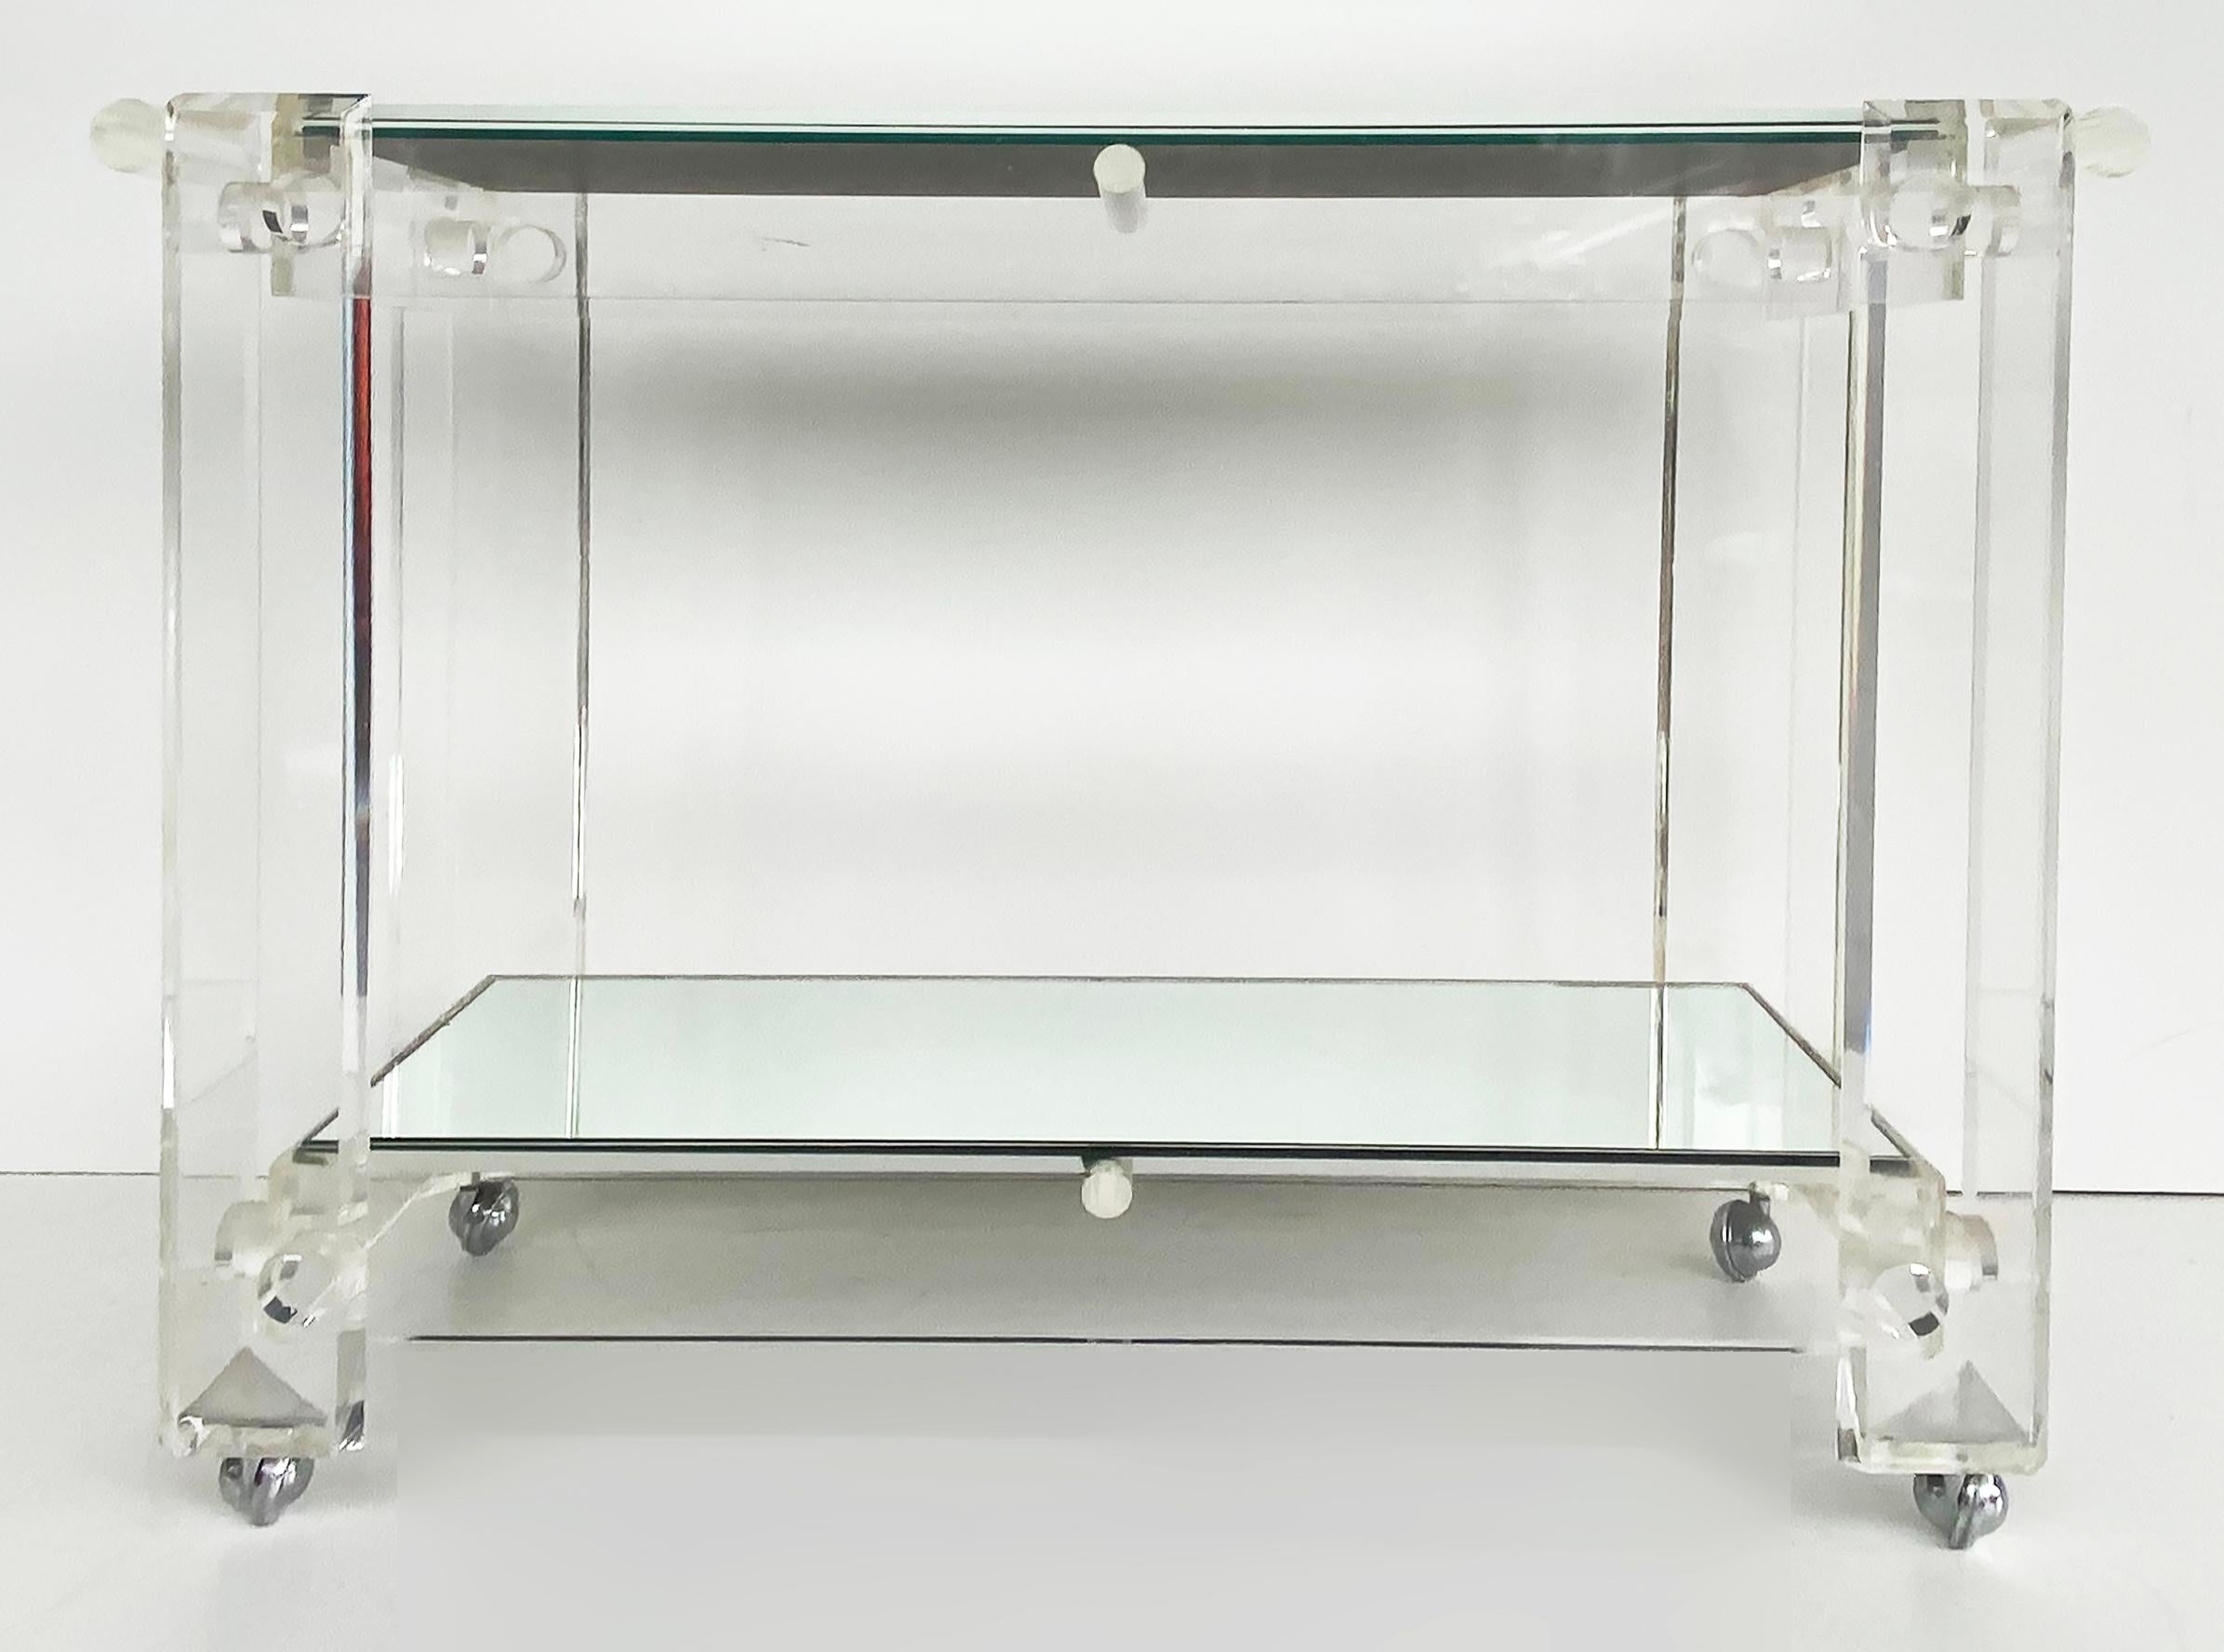 Mid-century Modern Lucite 2-Tiered Serving/Bar/Tea Cart on Casters

Offered for sale is a mid-century modern lucite two-tiered serving/bar/tea cart on casters and with mirrored shelves. The cart has a sturdy Lucite push handle at one end and will